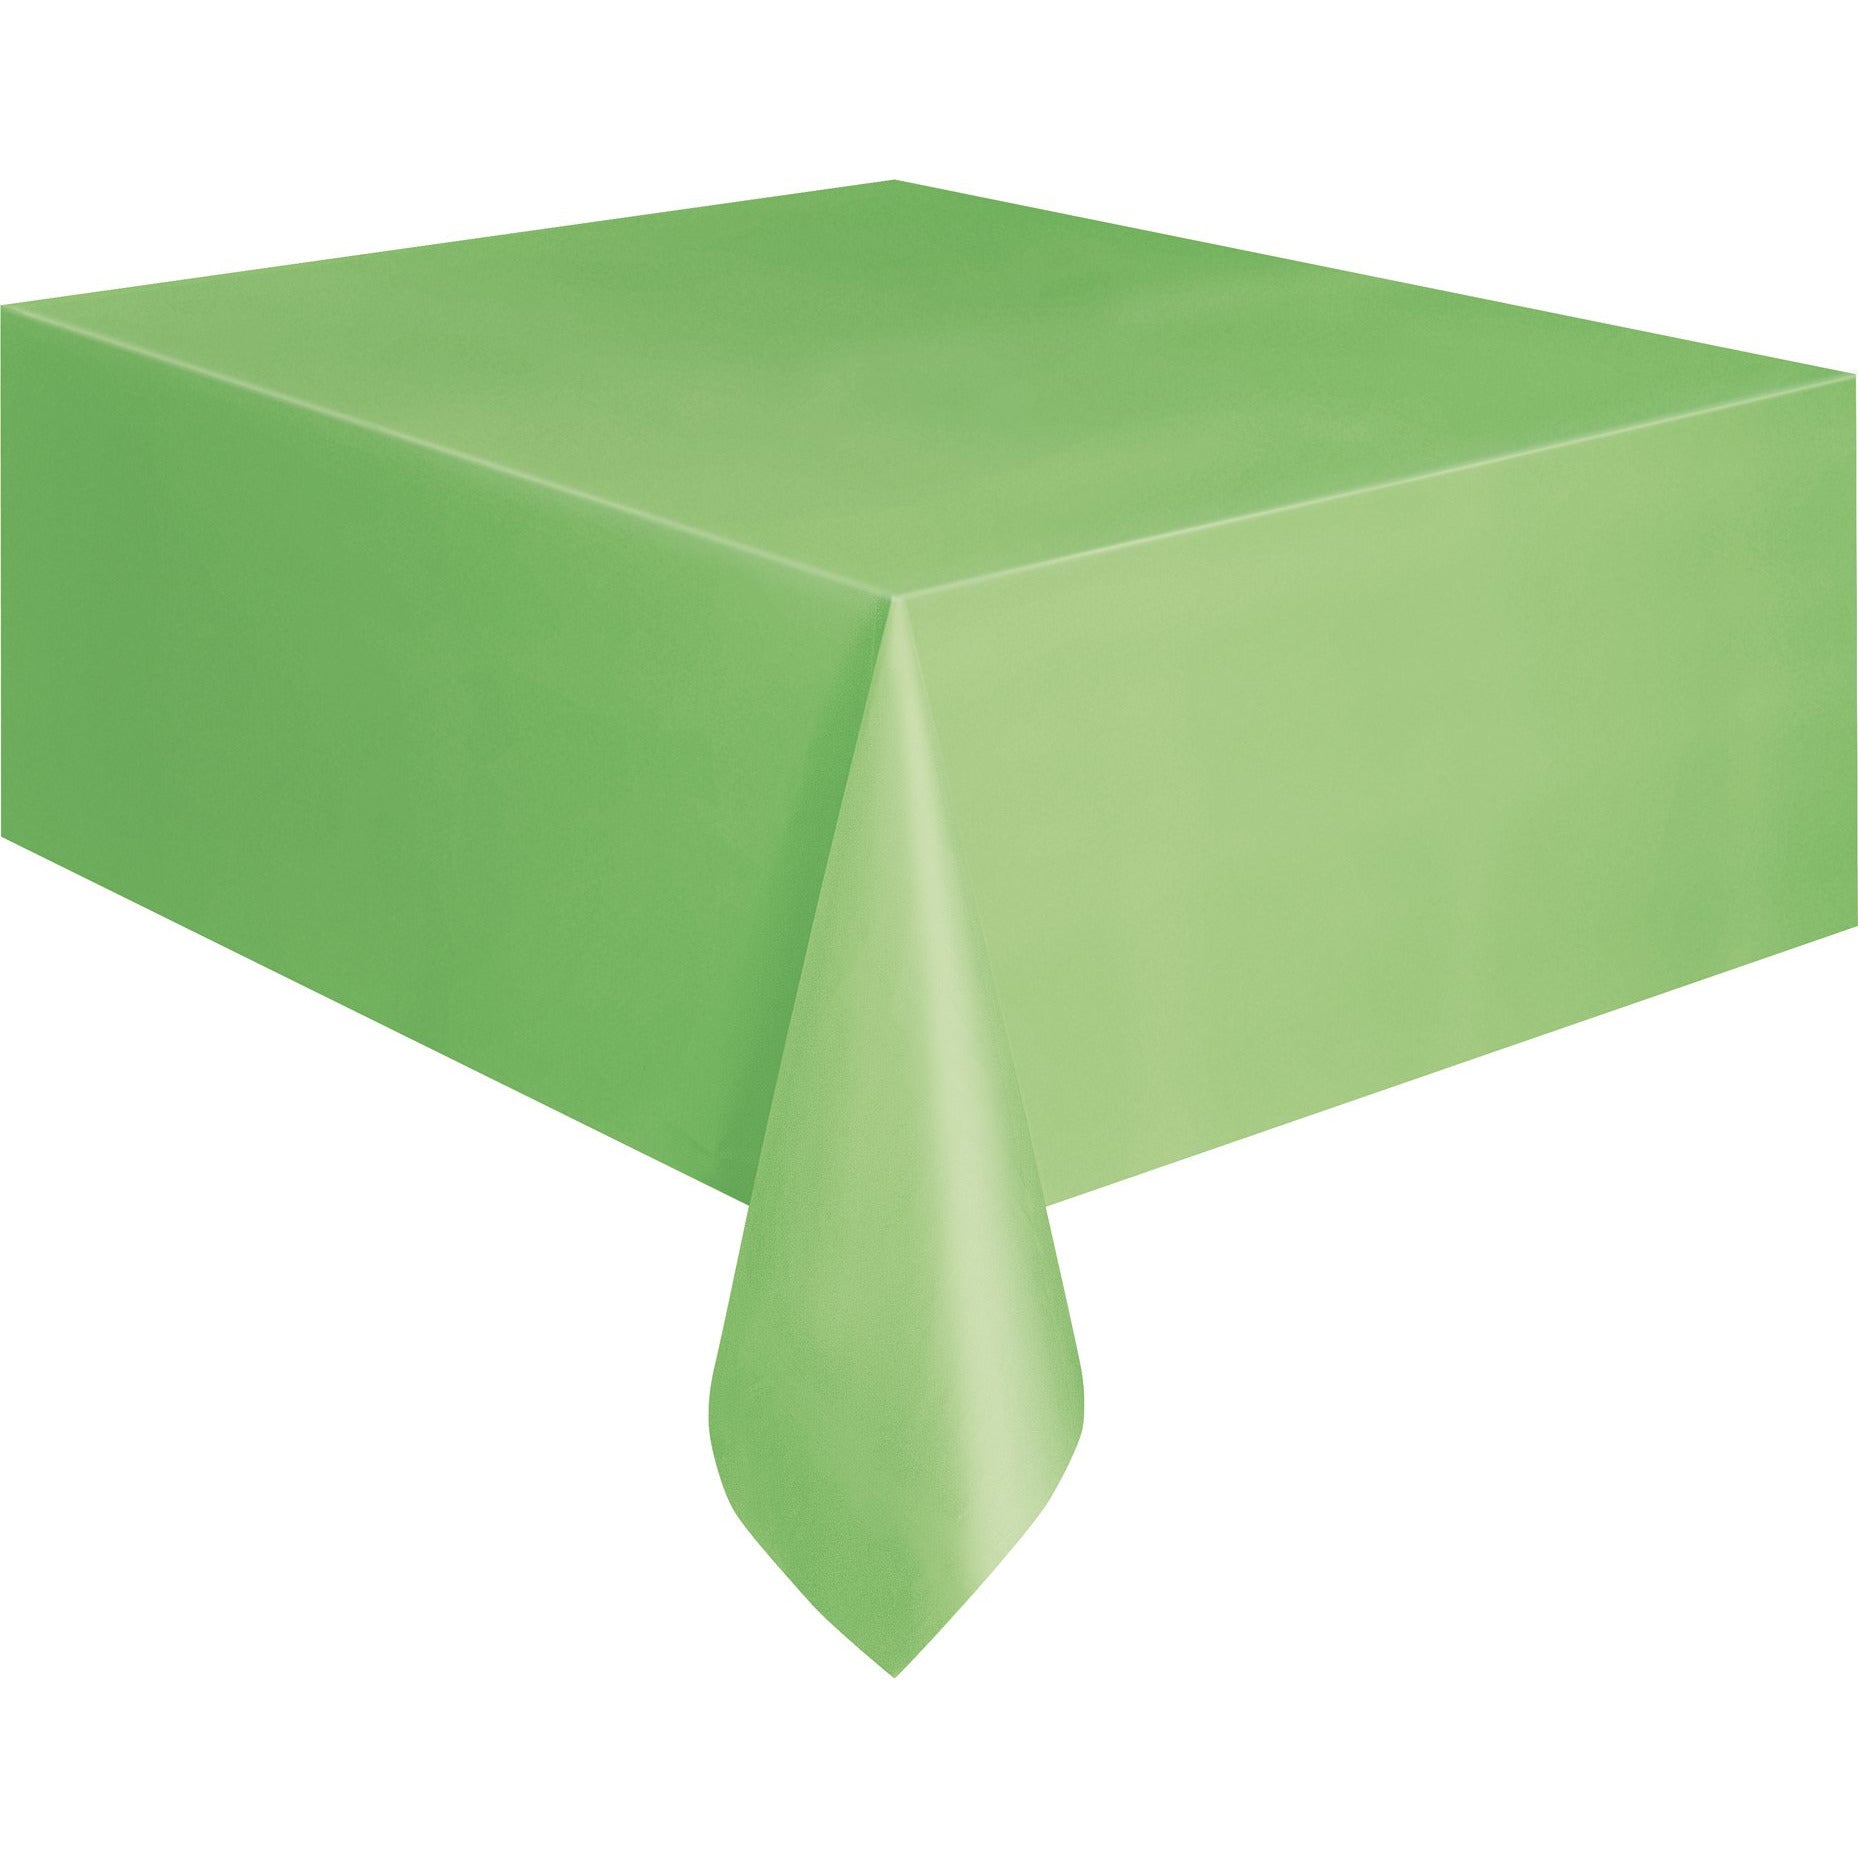 Plastic Tablecover - Lime Green - Dollars and Sense